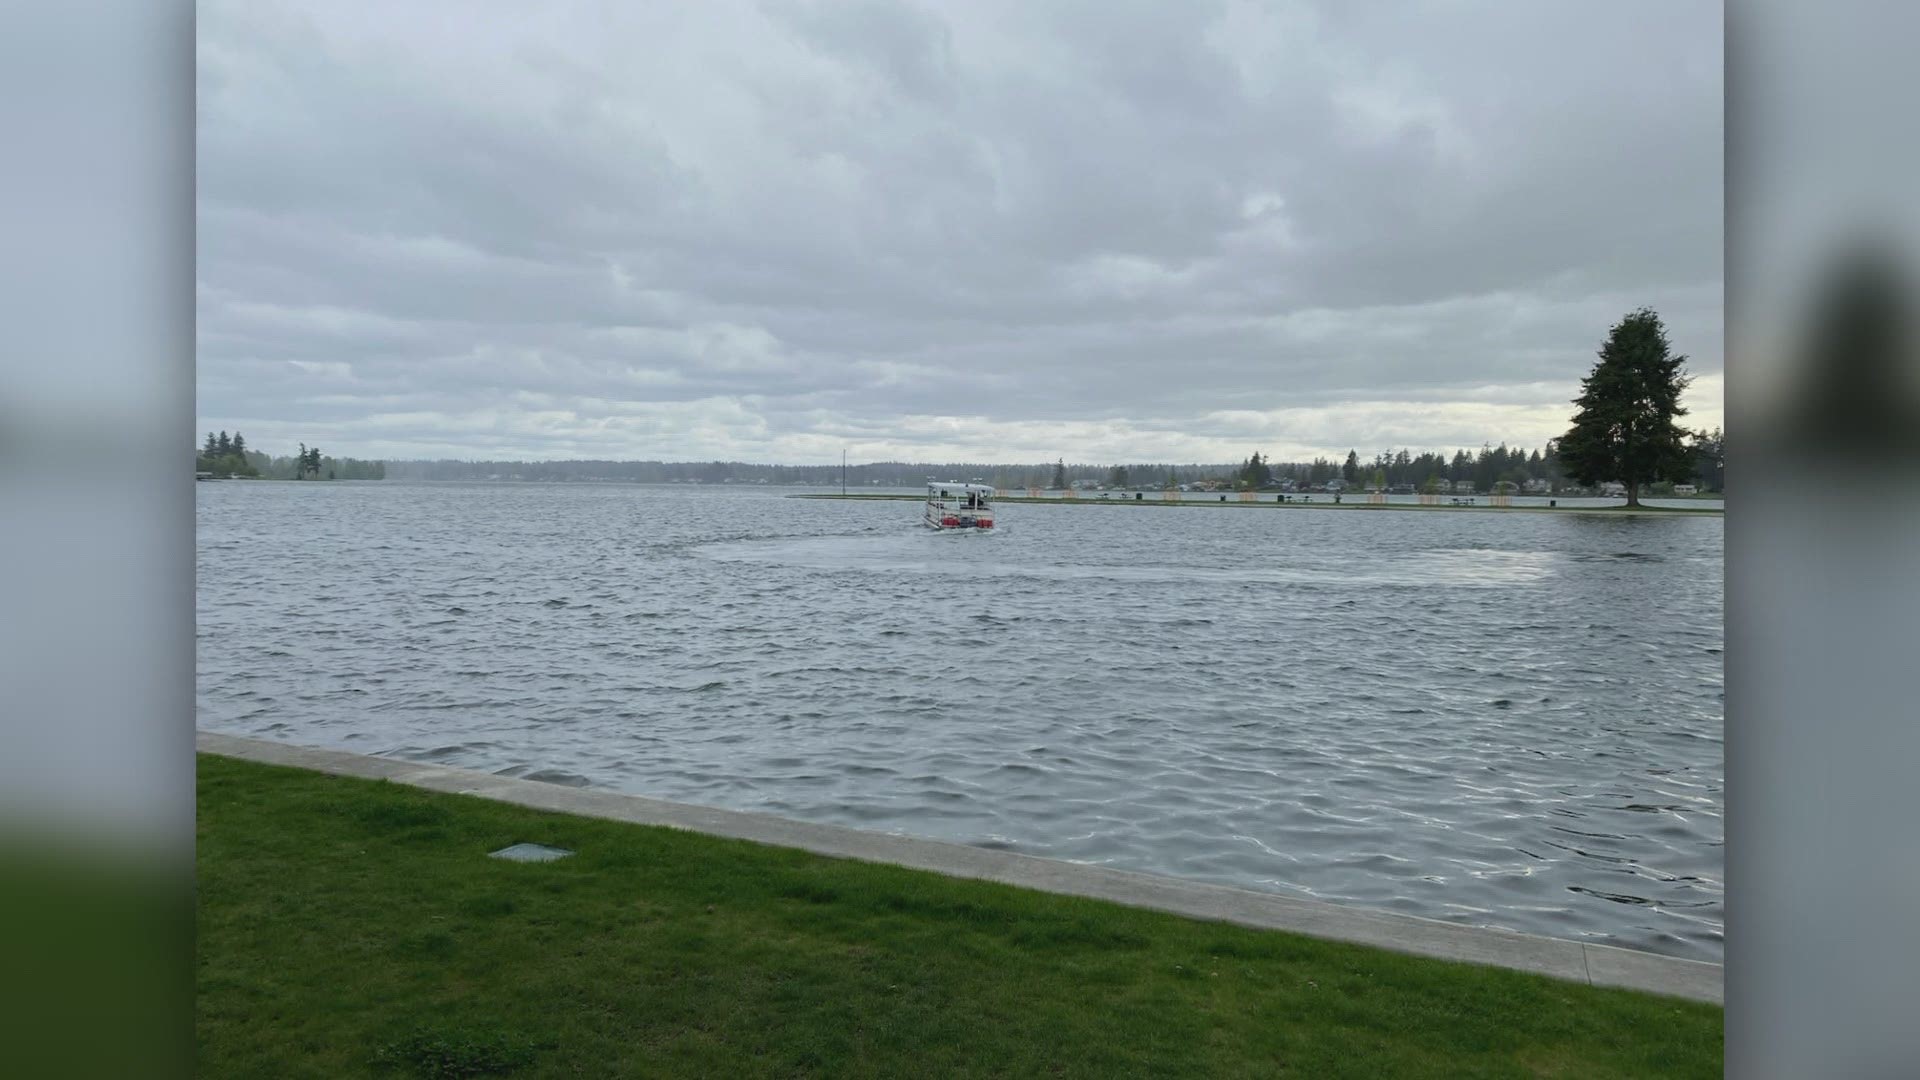 A 24-year-old was trying to swim across the lake, but didn't make it, according to the Pierce County Sheriff's Department.